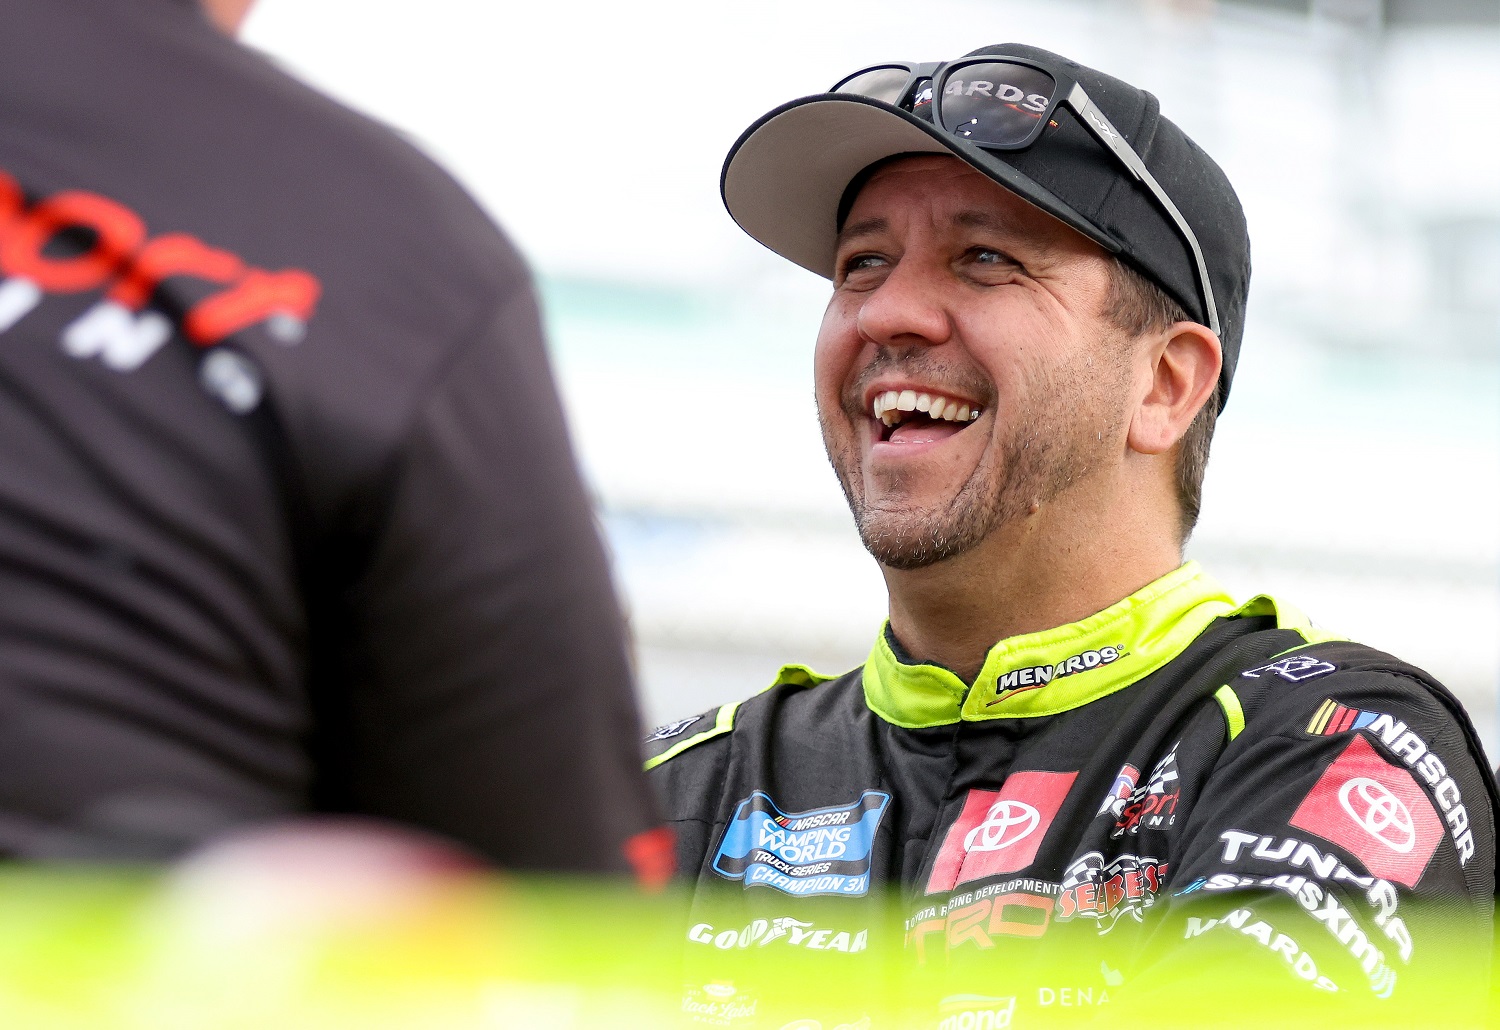 Matt Crafton shares a laugh with his crew on the grid during qualifying for the NASCAR Camping World Truck Series Baptist Health 200 at Homestead-Miami Speedway on Oct. 21, 2022. | Jared East/Getty Images